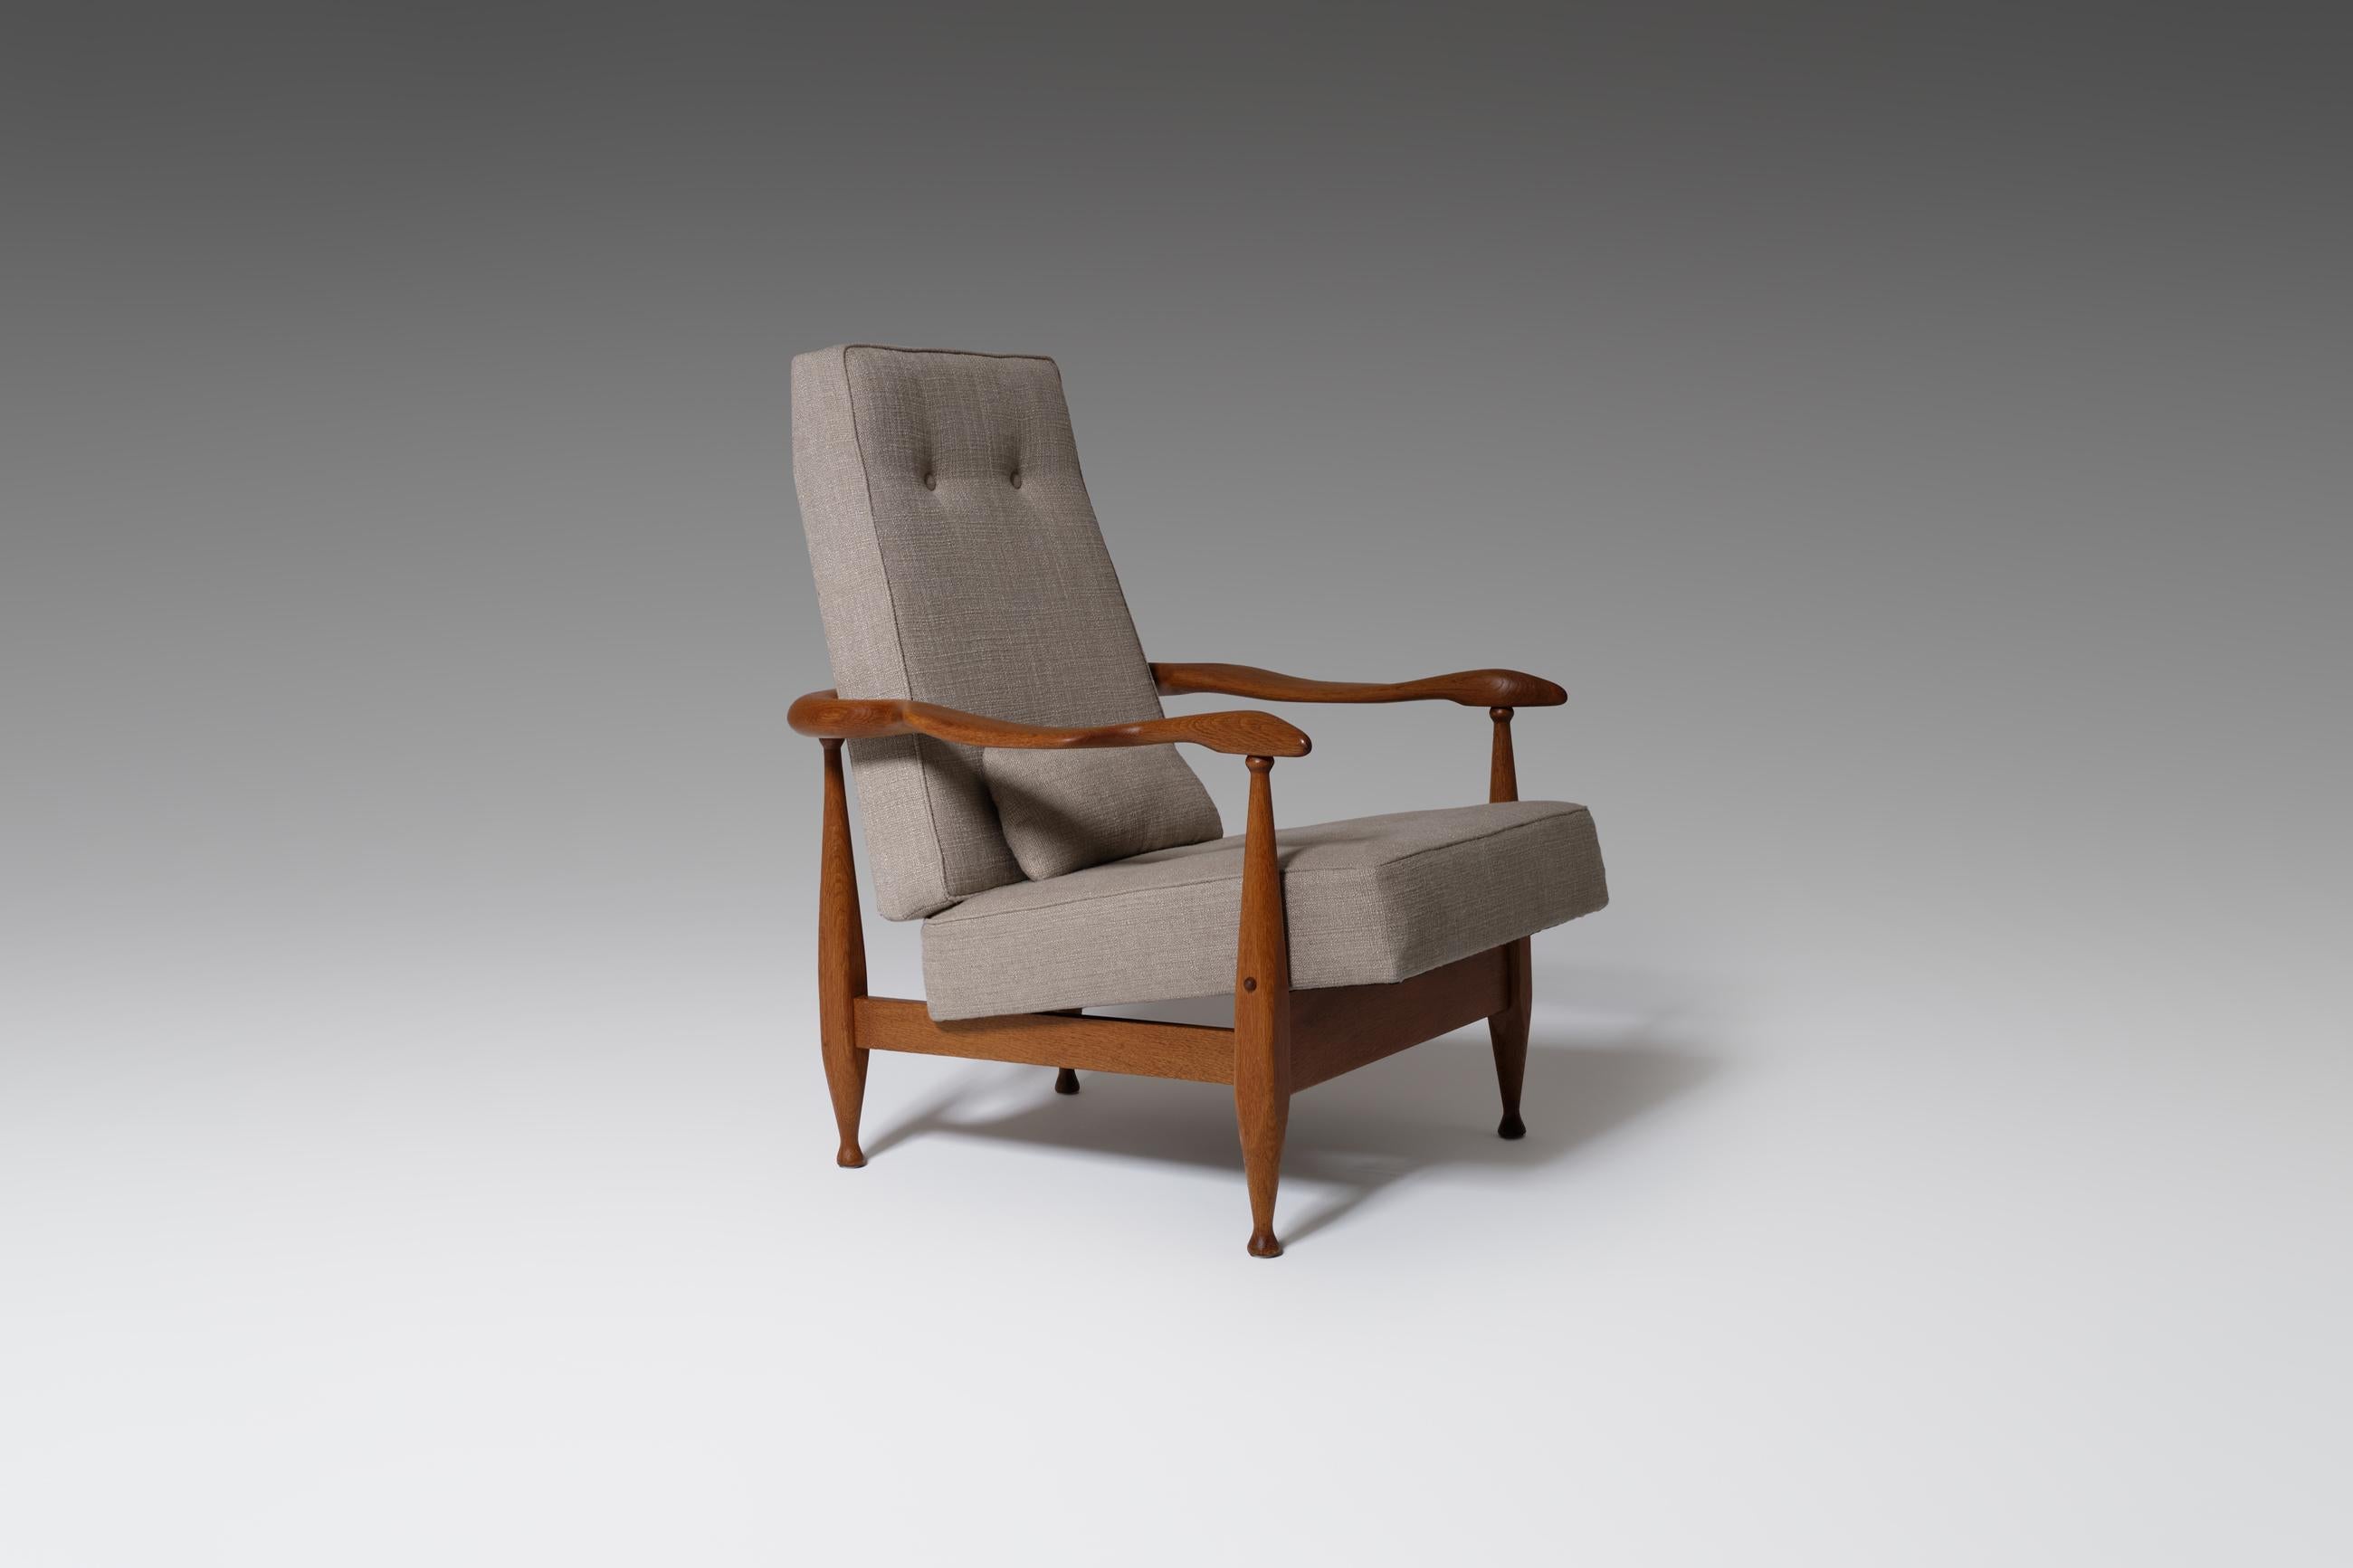 Rare ‘Dagober’ / ‘Air France’ lounge chair by Guillerme et Chambron, France 1960s. The very well constructed solid oak frame shows many interesting shapes and lines which is making it almost sculptural. The shape of the armrests guides your arms in